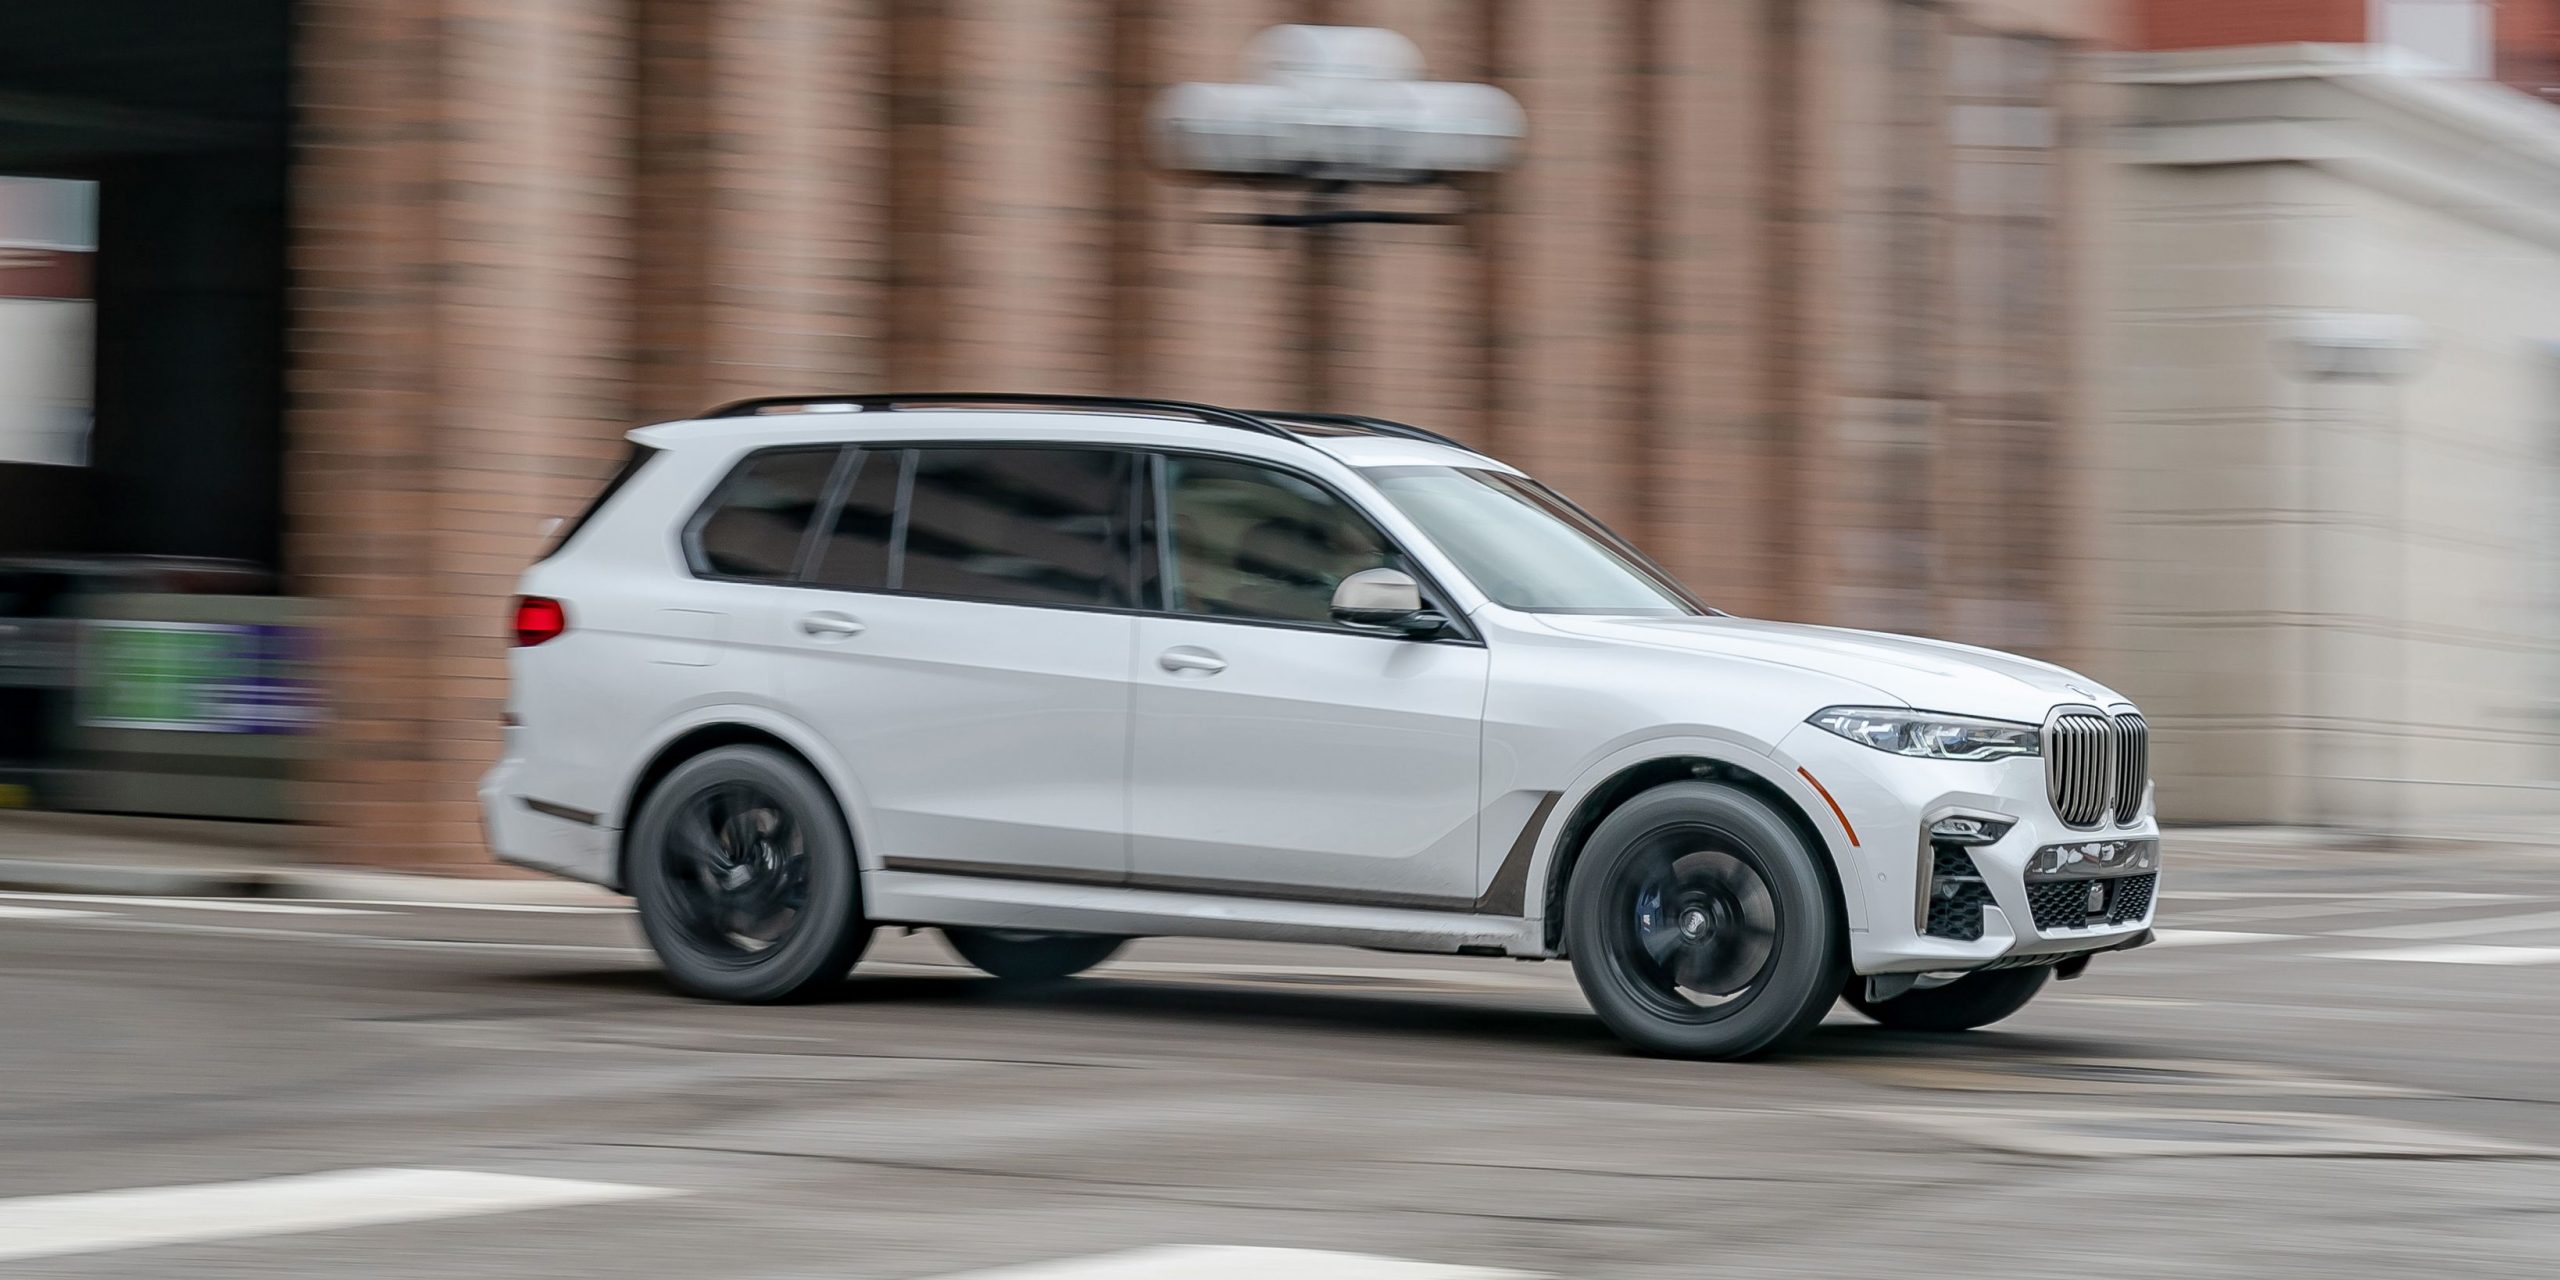 Our 2020 BMW X7 M50i Has Its Sights Set on a Perfect Test